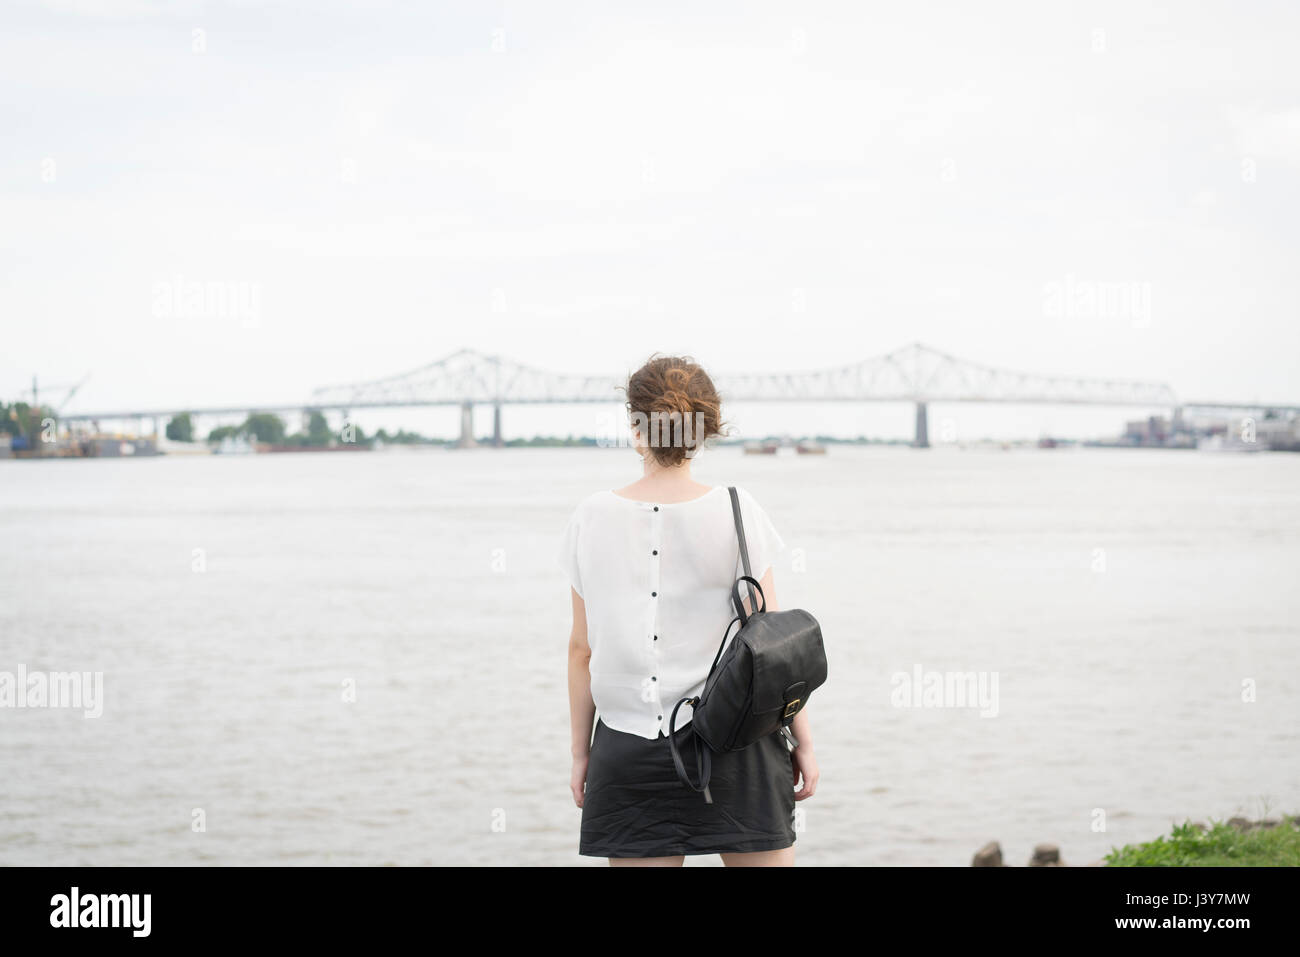 Rear view of woman looking at New orleans bridge, Mississippi river, French Quarter, New Orleans, Louisiana, USA Stock Photo